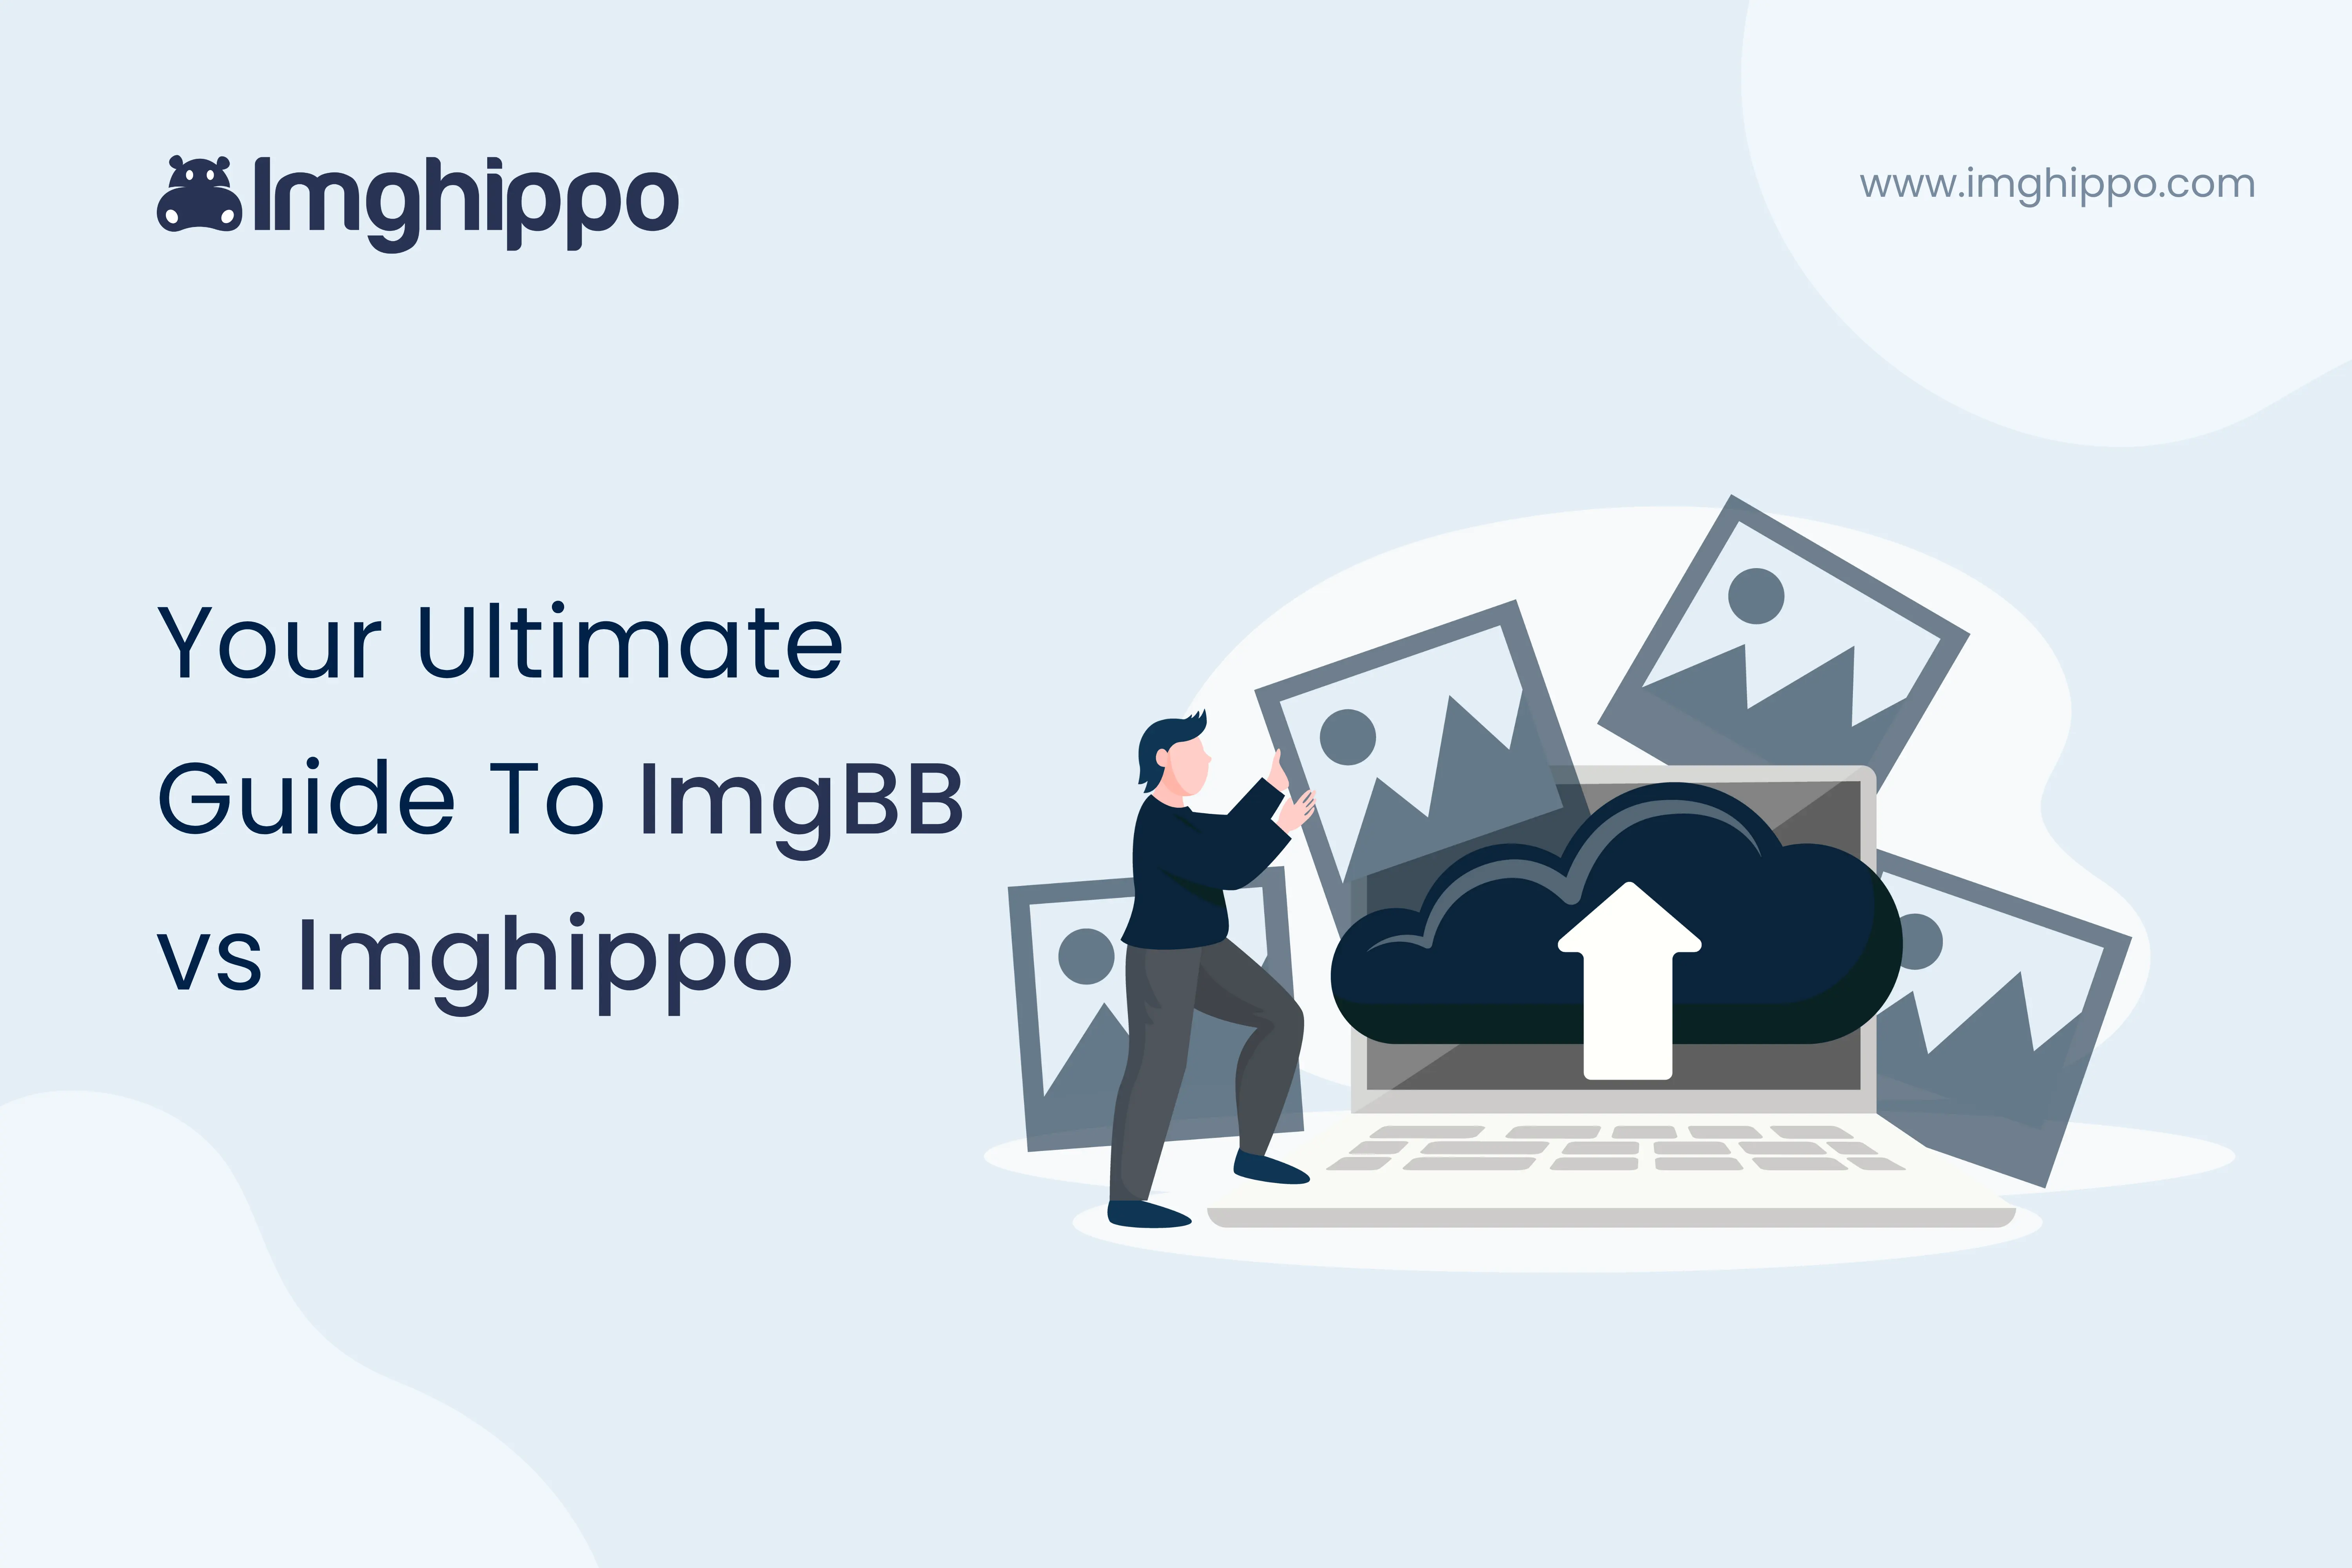 Your Ultimate Guide To ImgBB vs Imghippo